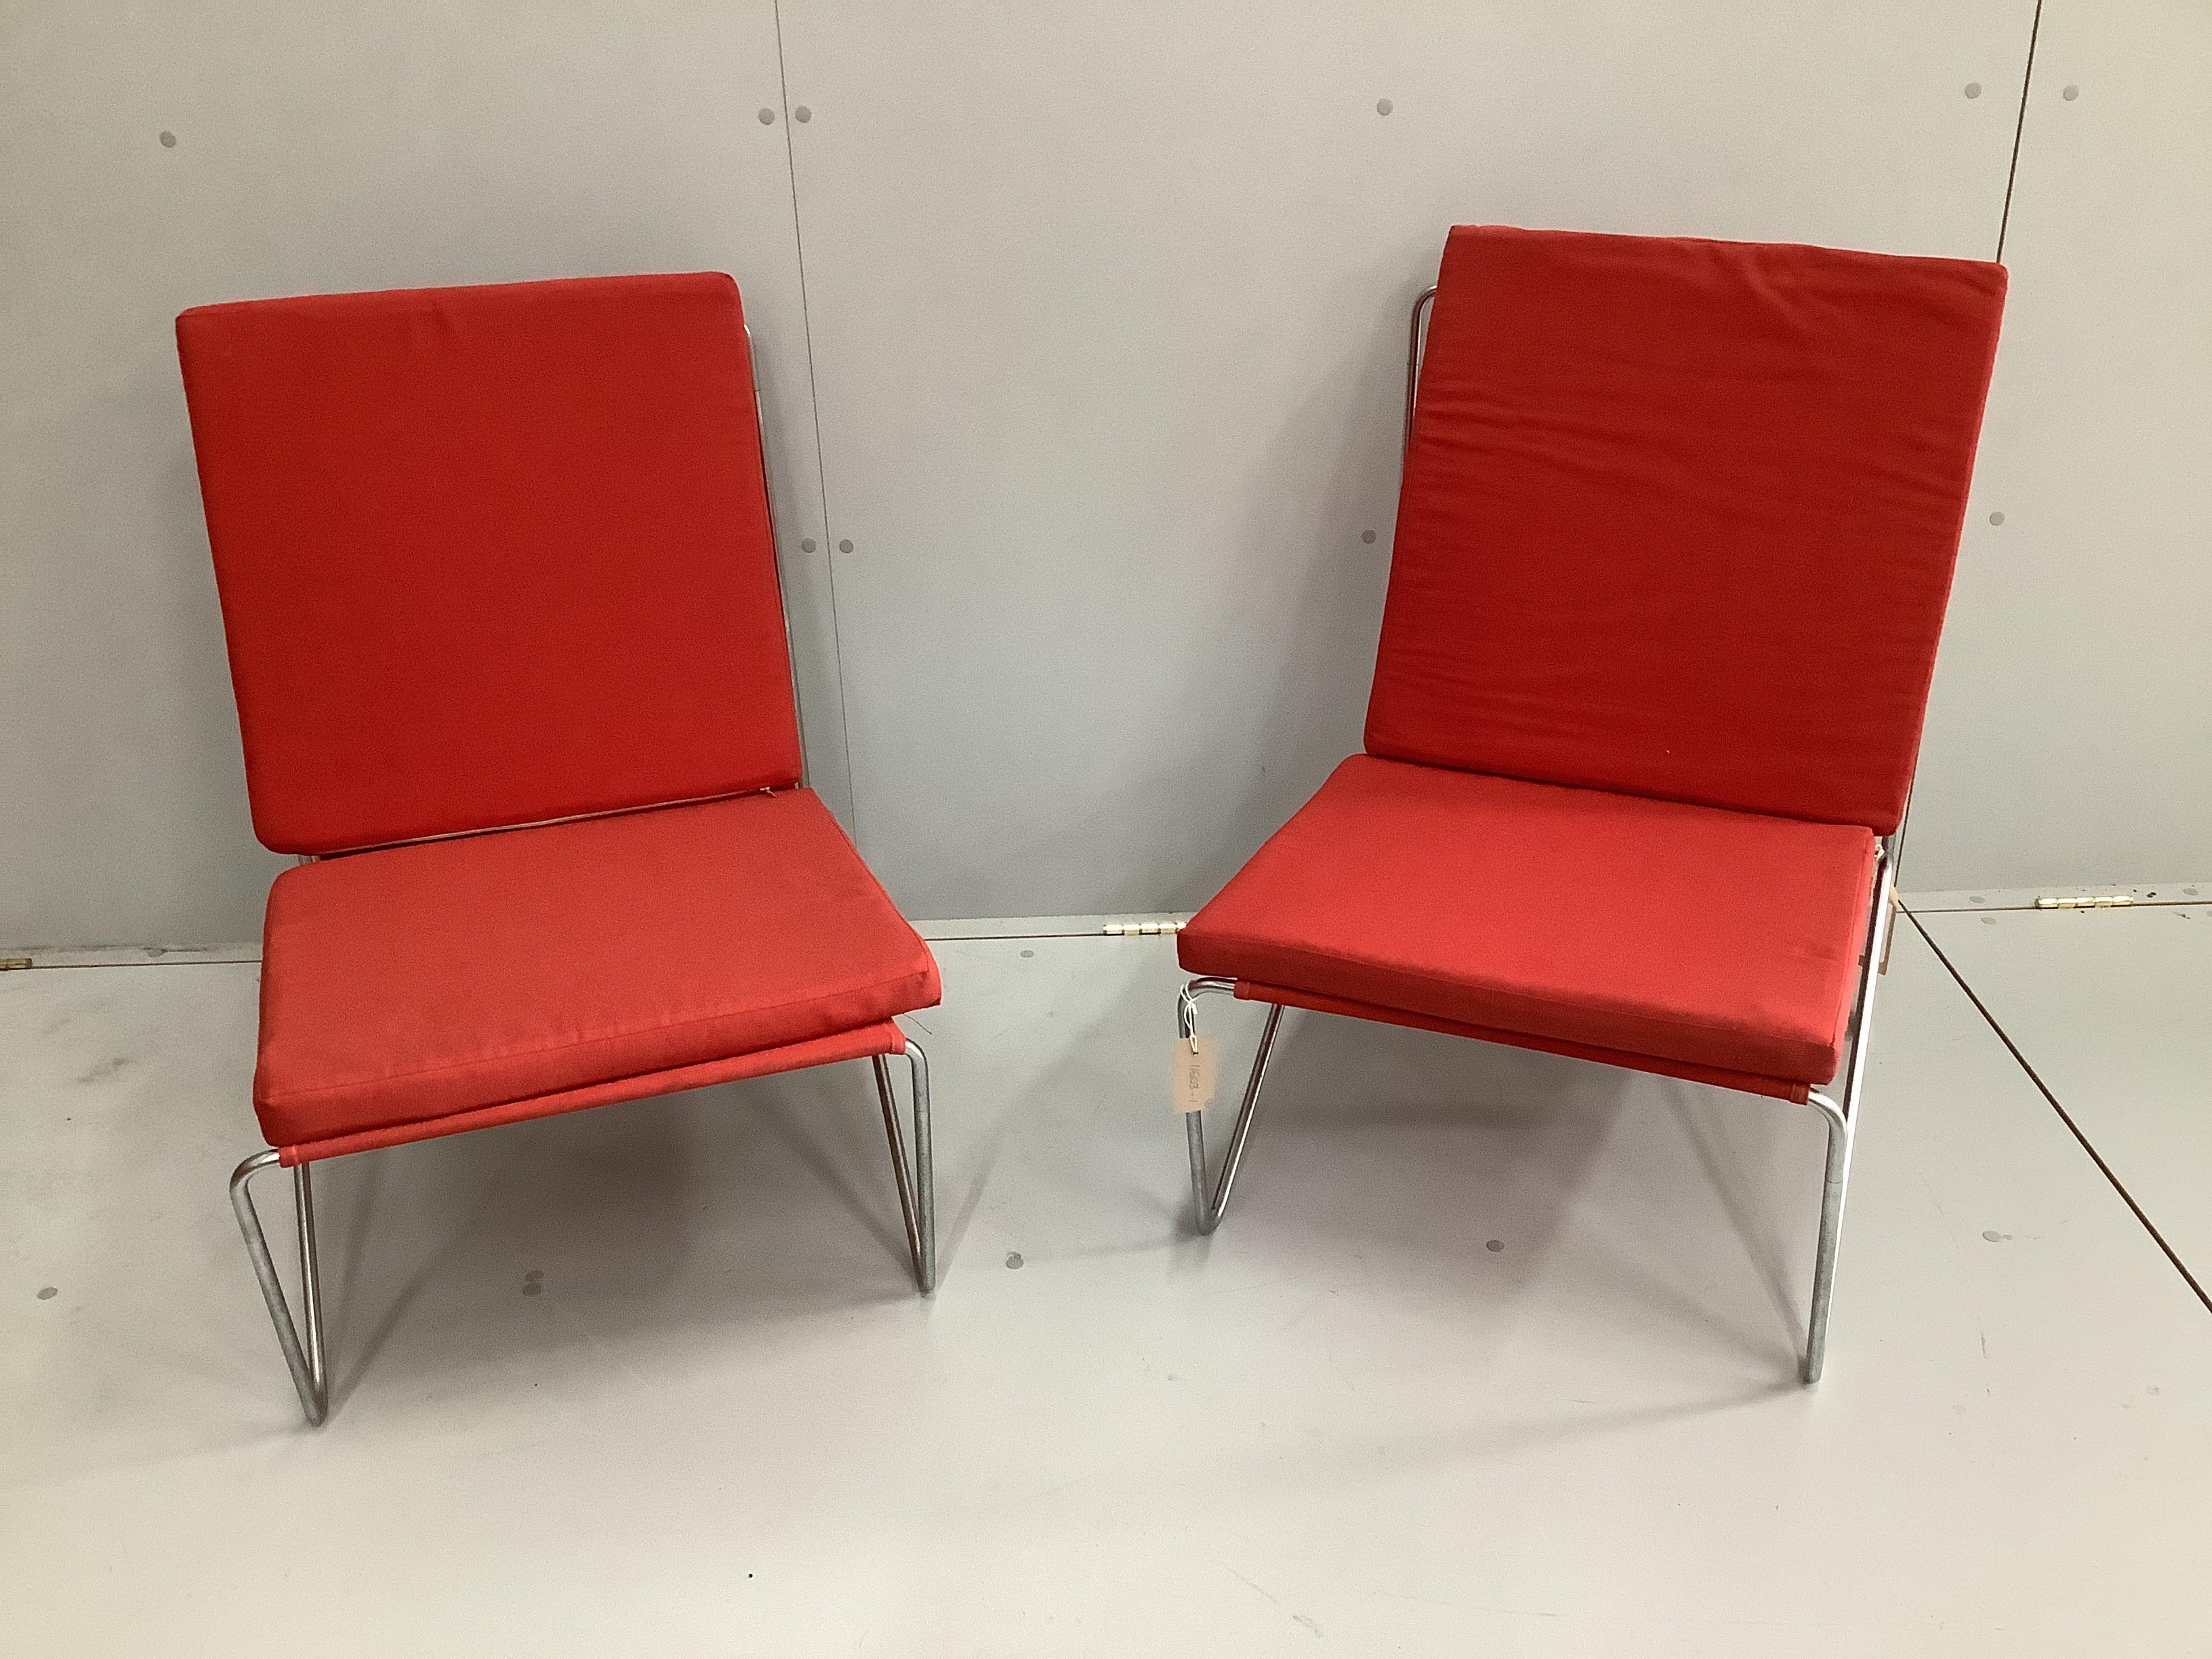 Two Danish chrome steel and red canvas Bachelor chairs (model VP-04-H201-C), each with two cushions by Verner Panton, width 50cm, depth 72cm, height 77cm - these were purchased in Frankfurt, 1965